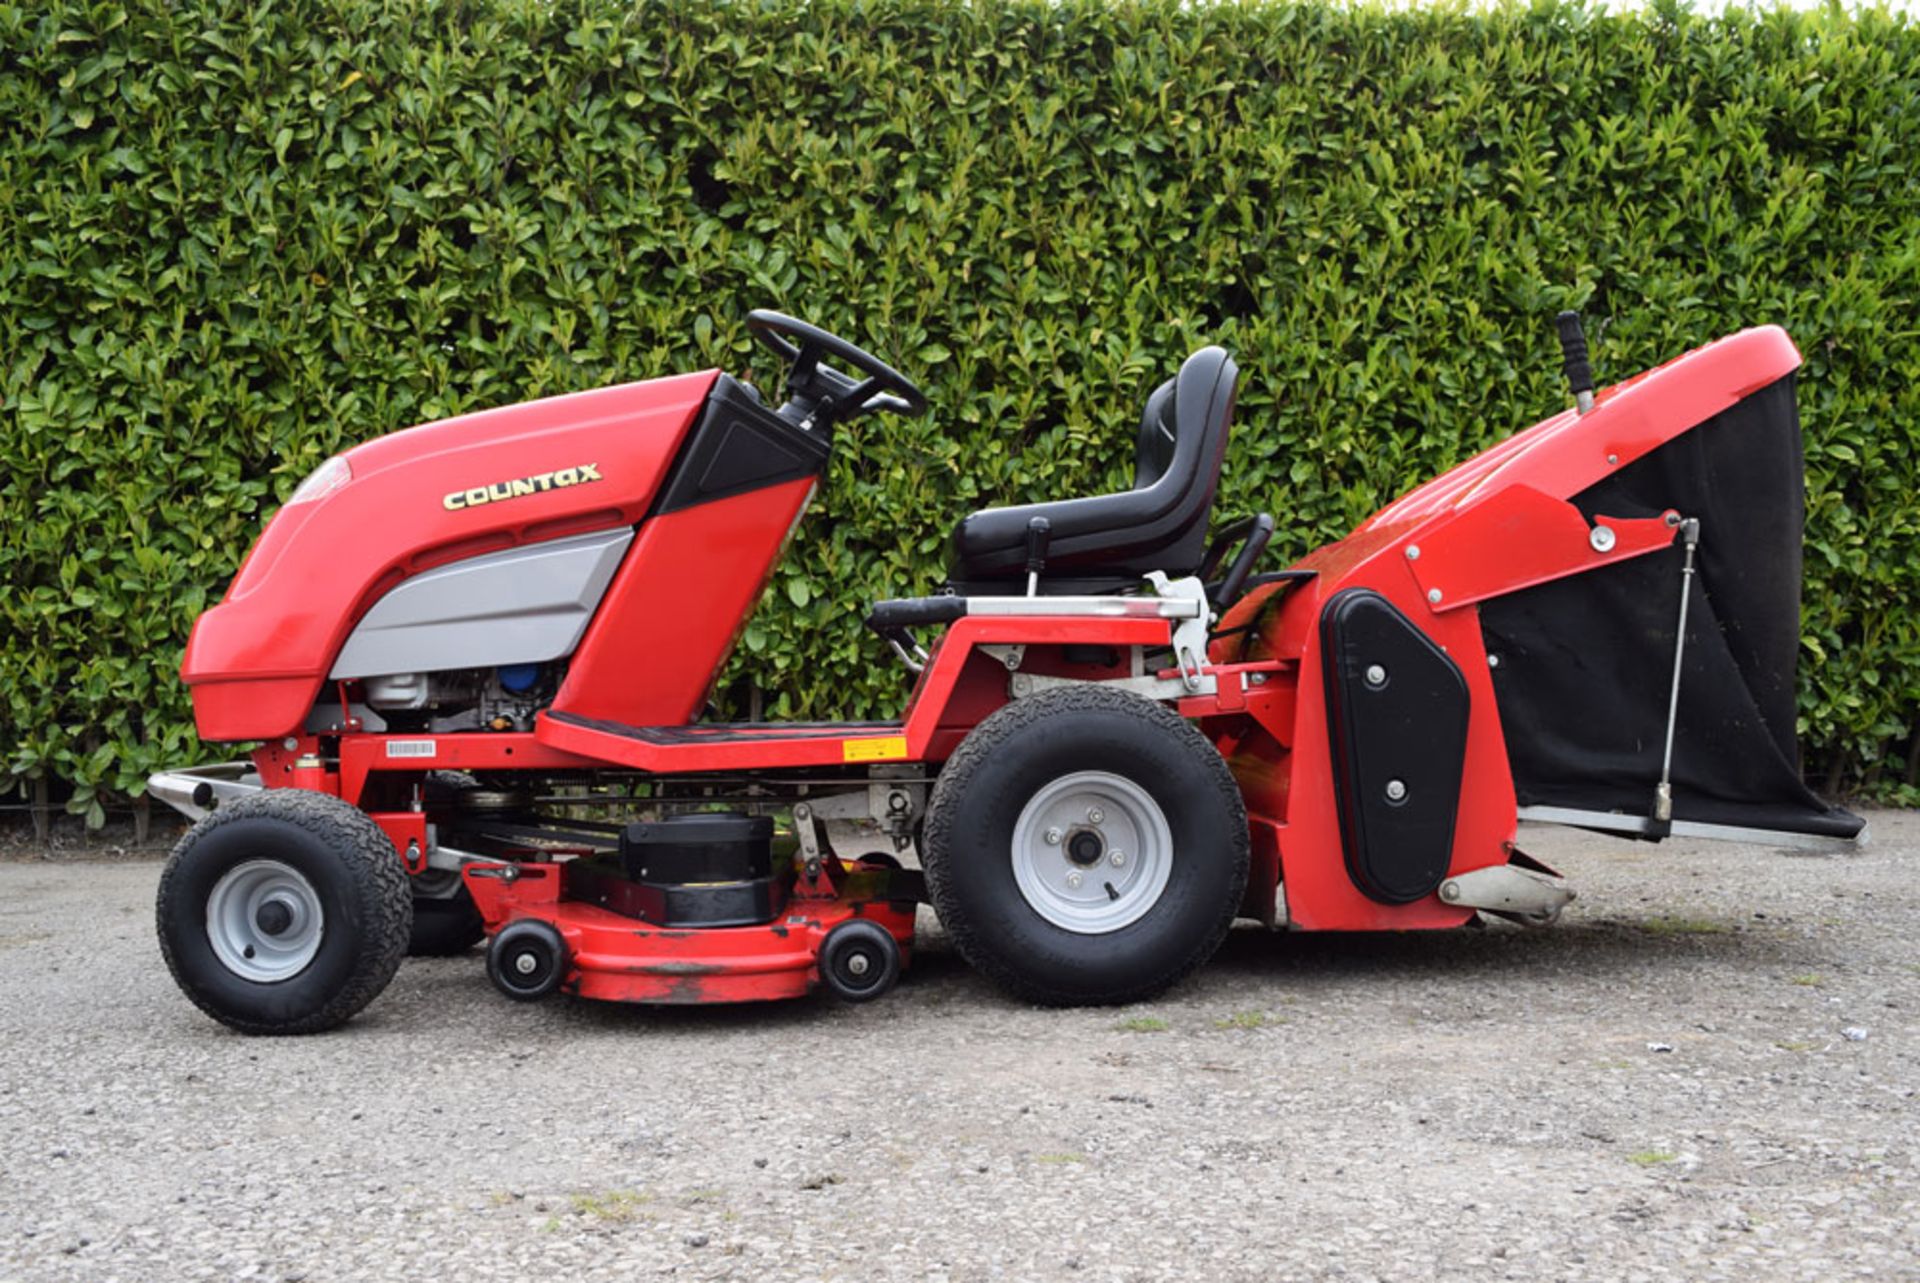 Countax C800H 44" Rear Discharge Garden Tractor With PGC - Image 4 of 7